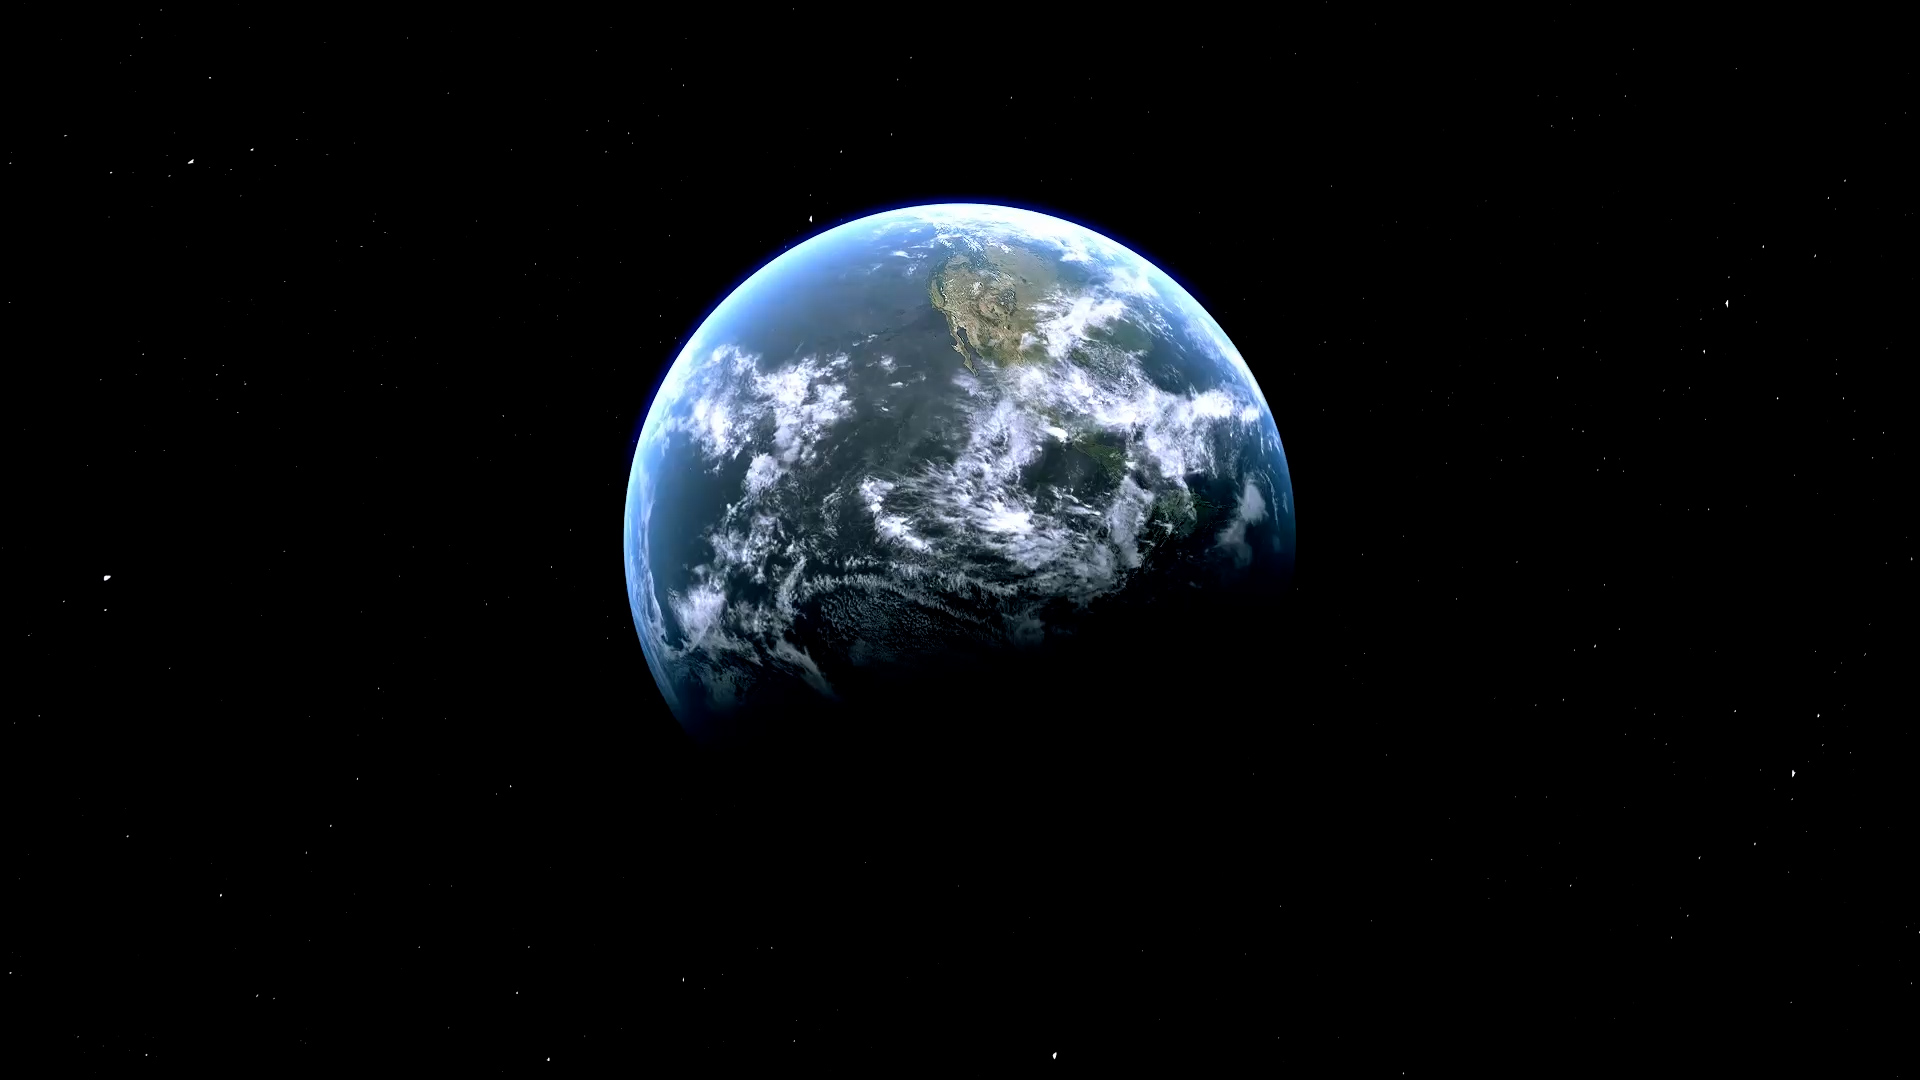 The view of the earth in space.